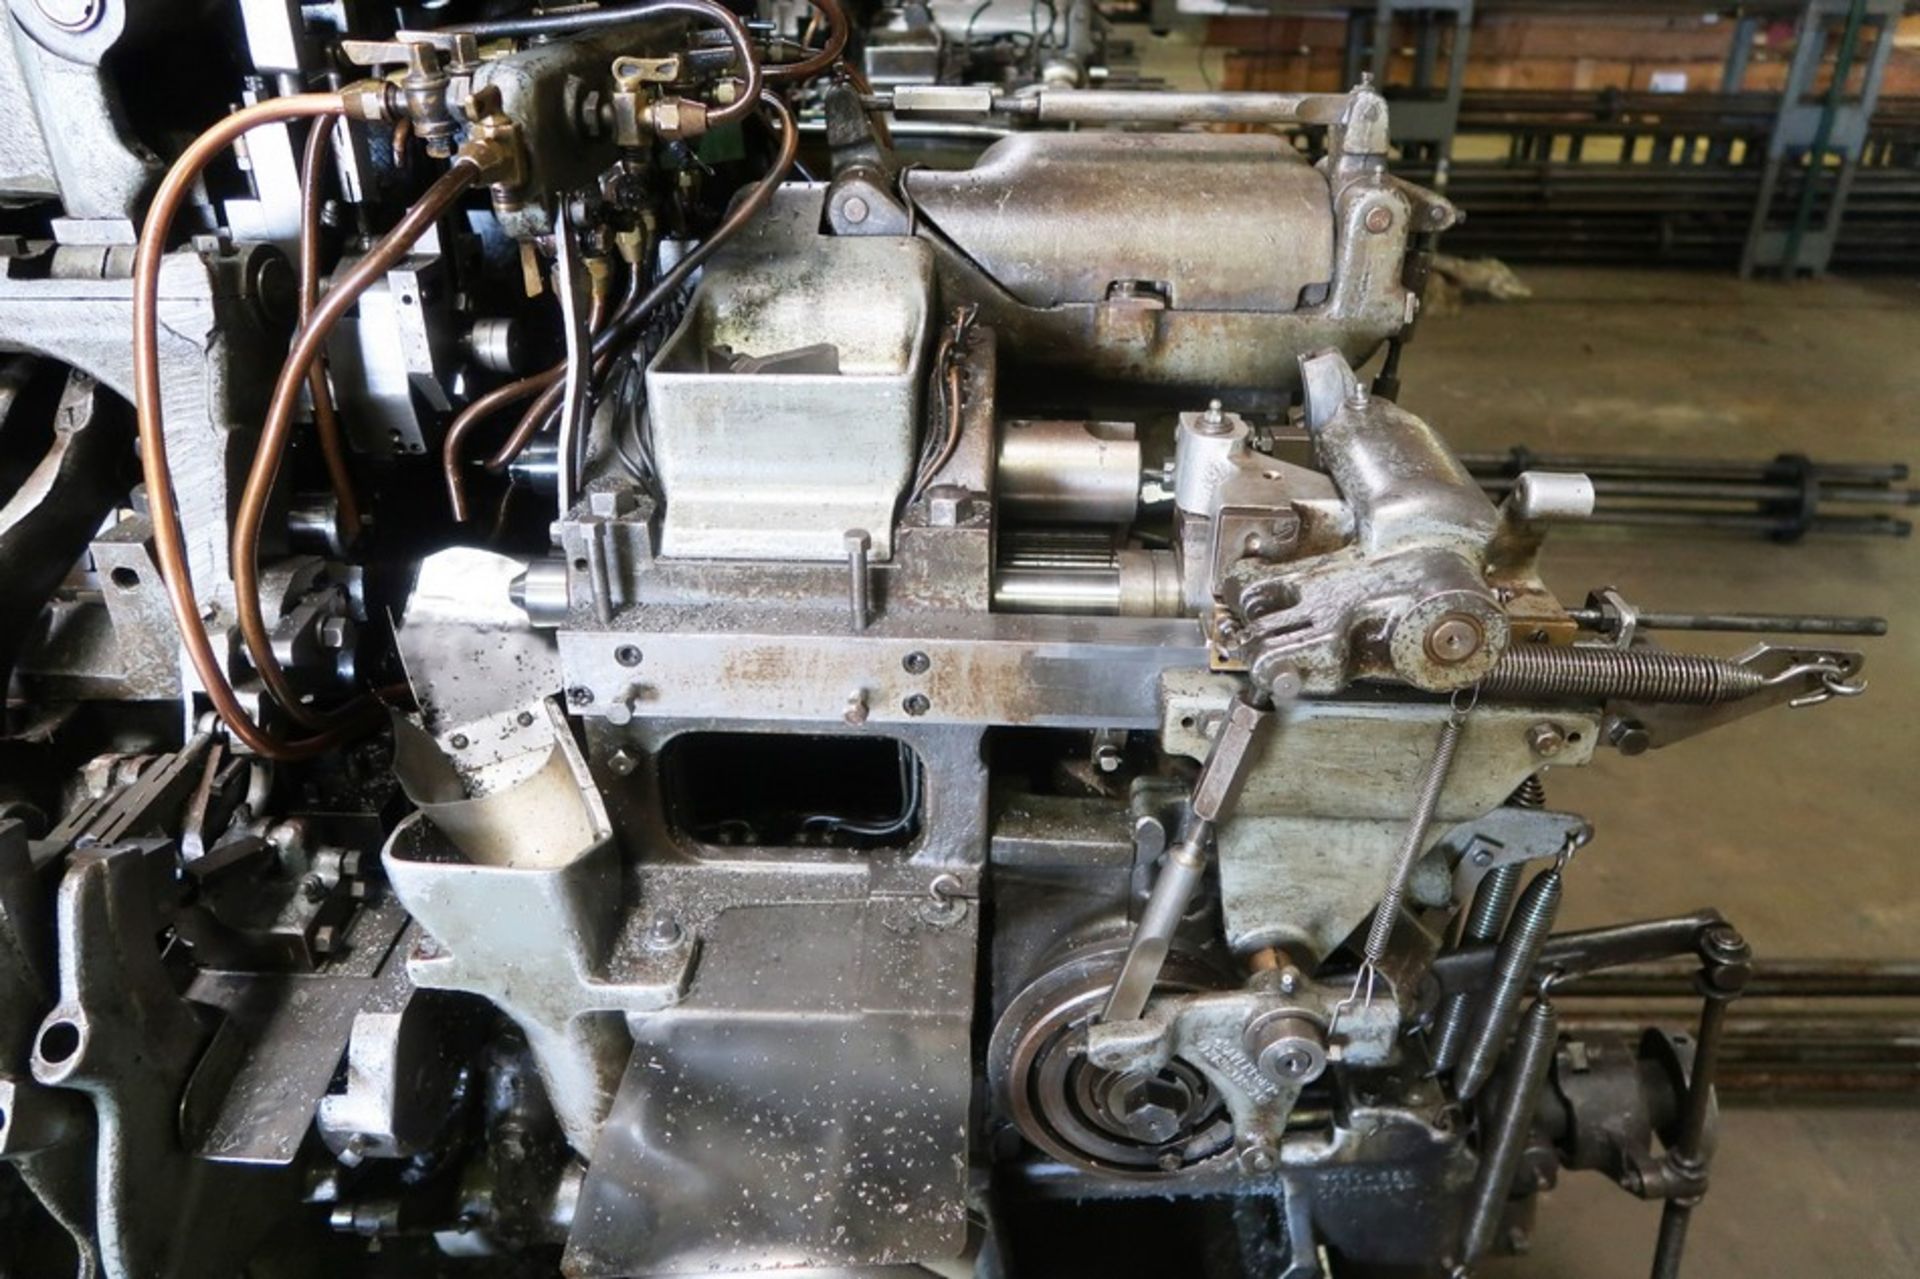 3/4" 1960 Davenport Model B 5-Spindle Automatic Bar Machine, S/N 4120 - Image 2 of 5